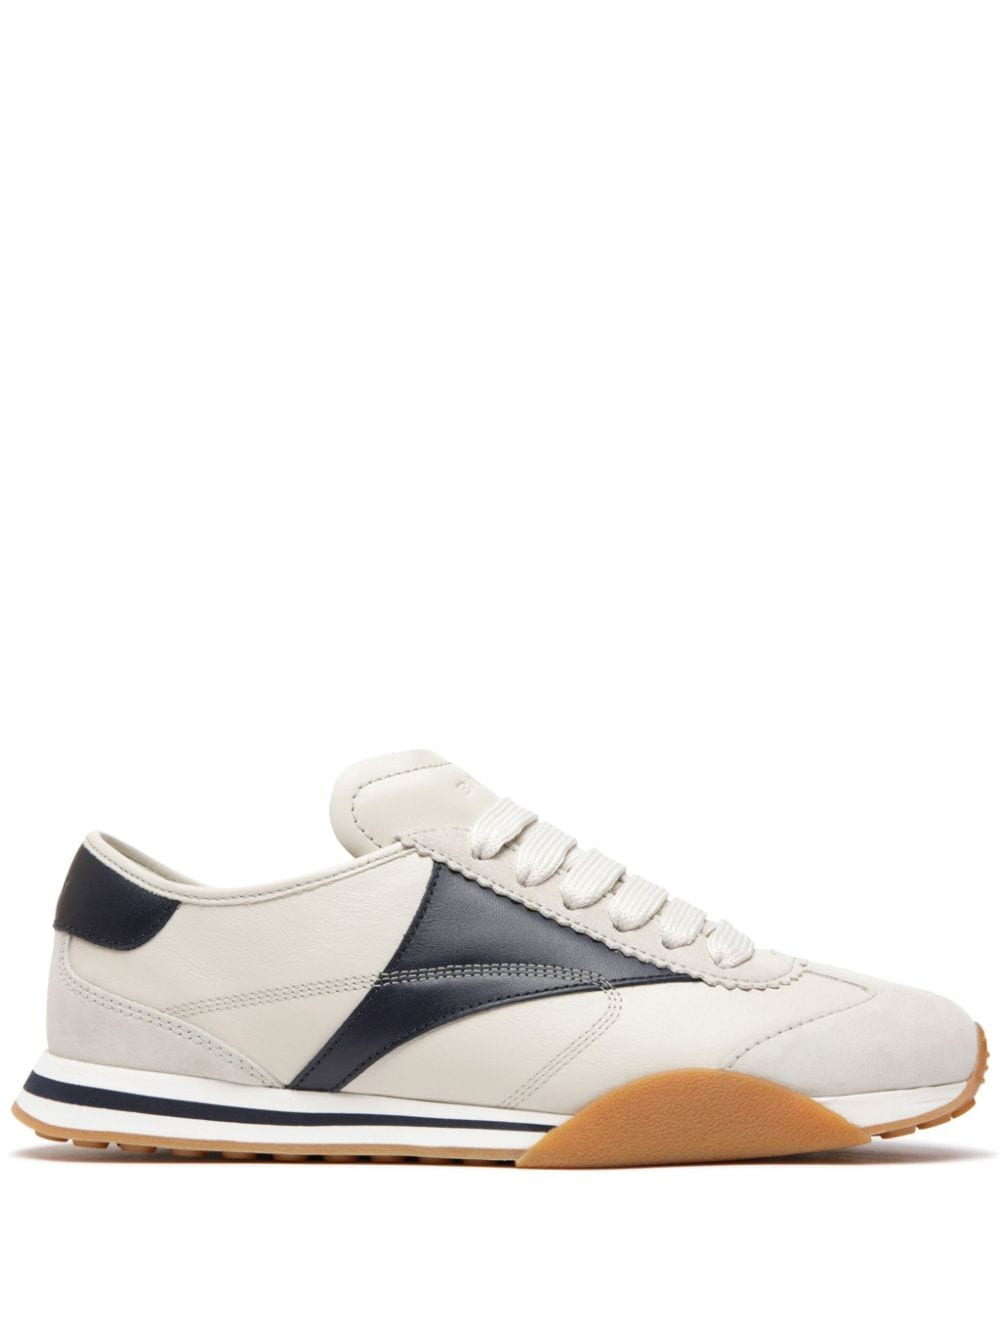 Bally Sonney lace-up leather sneakers White